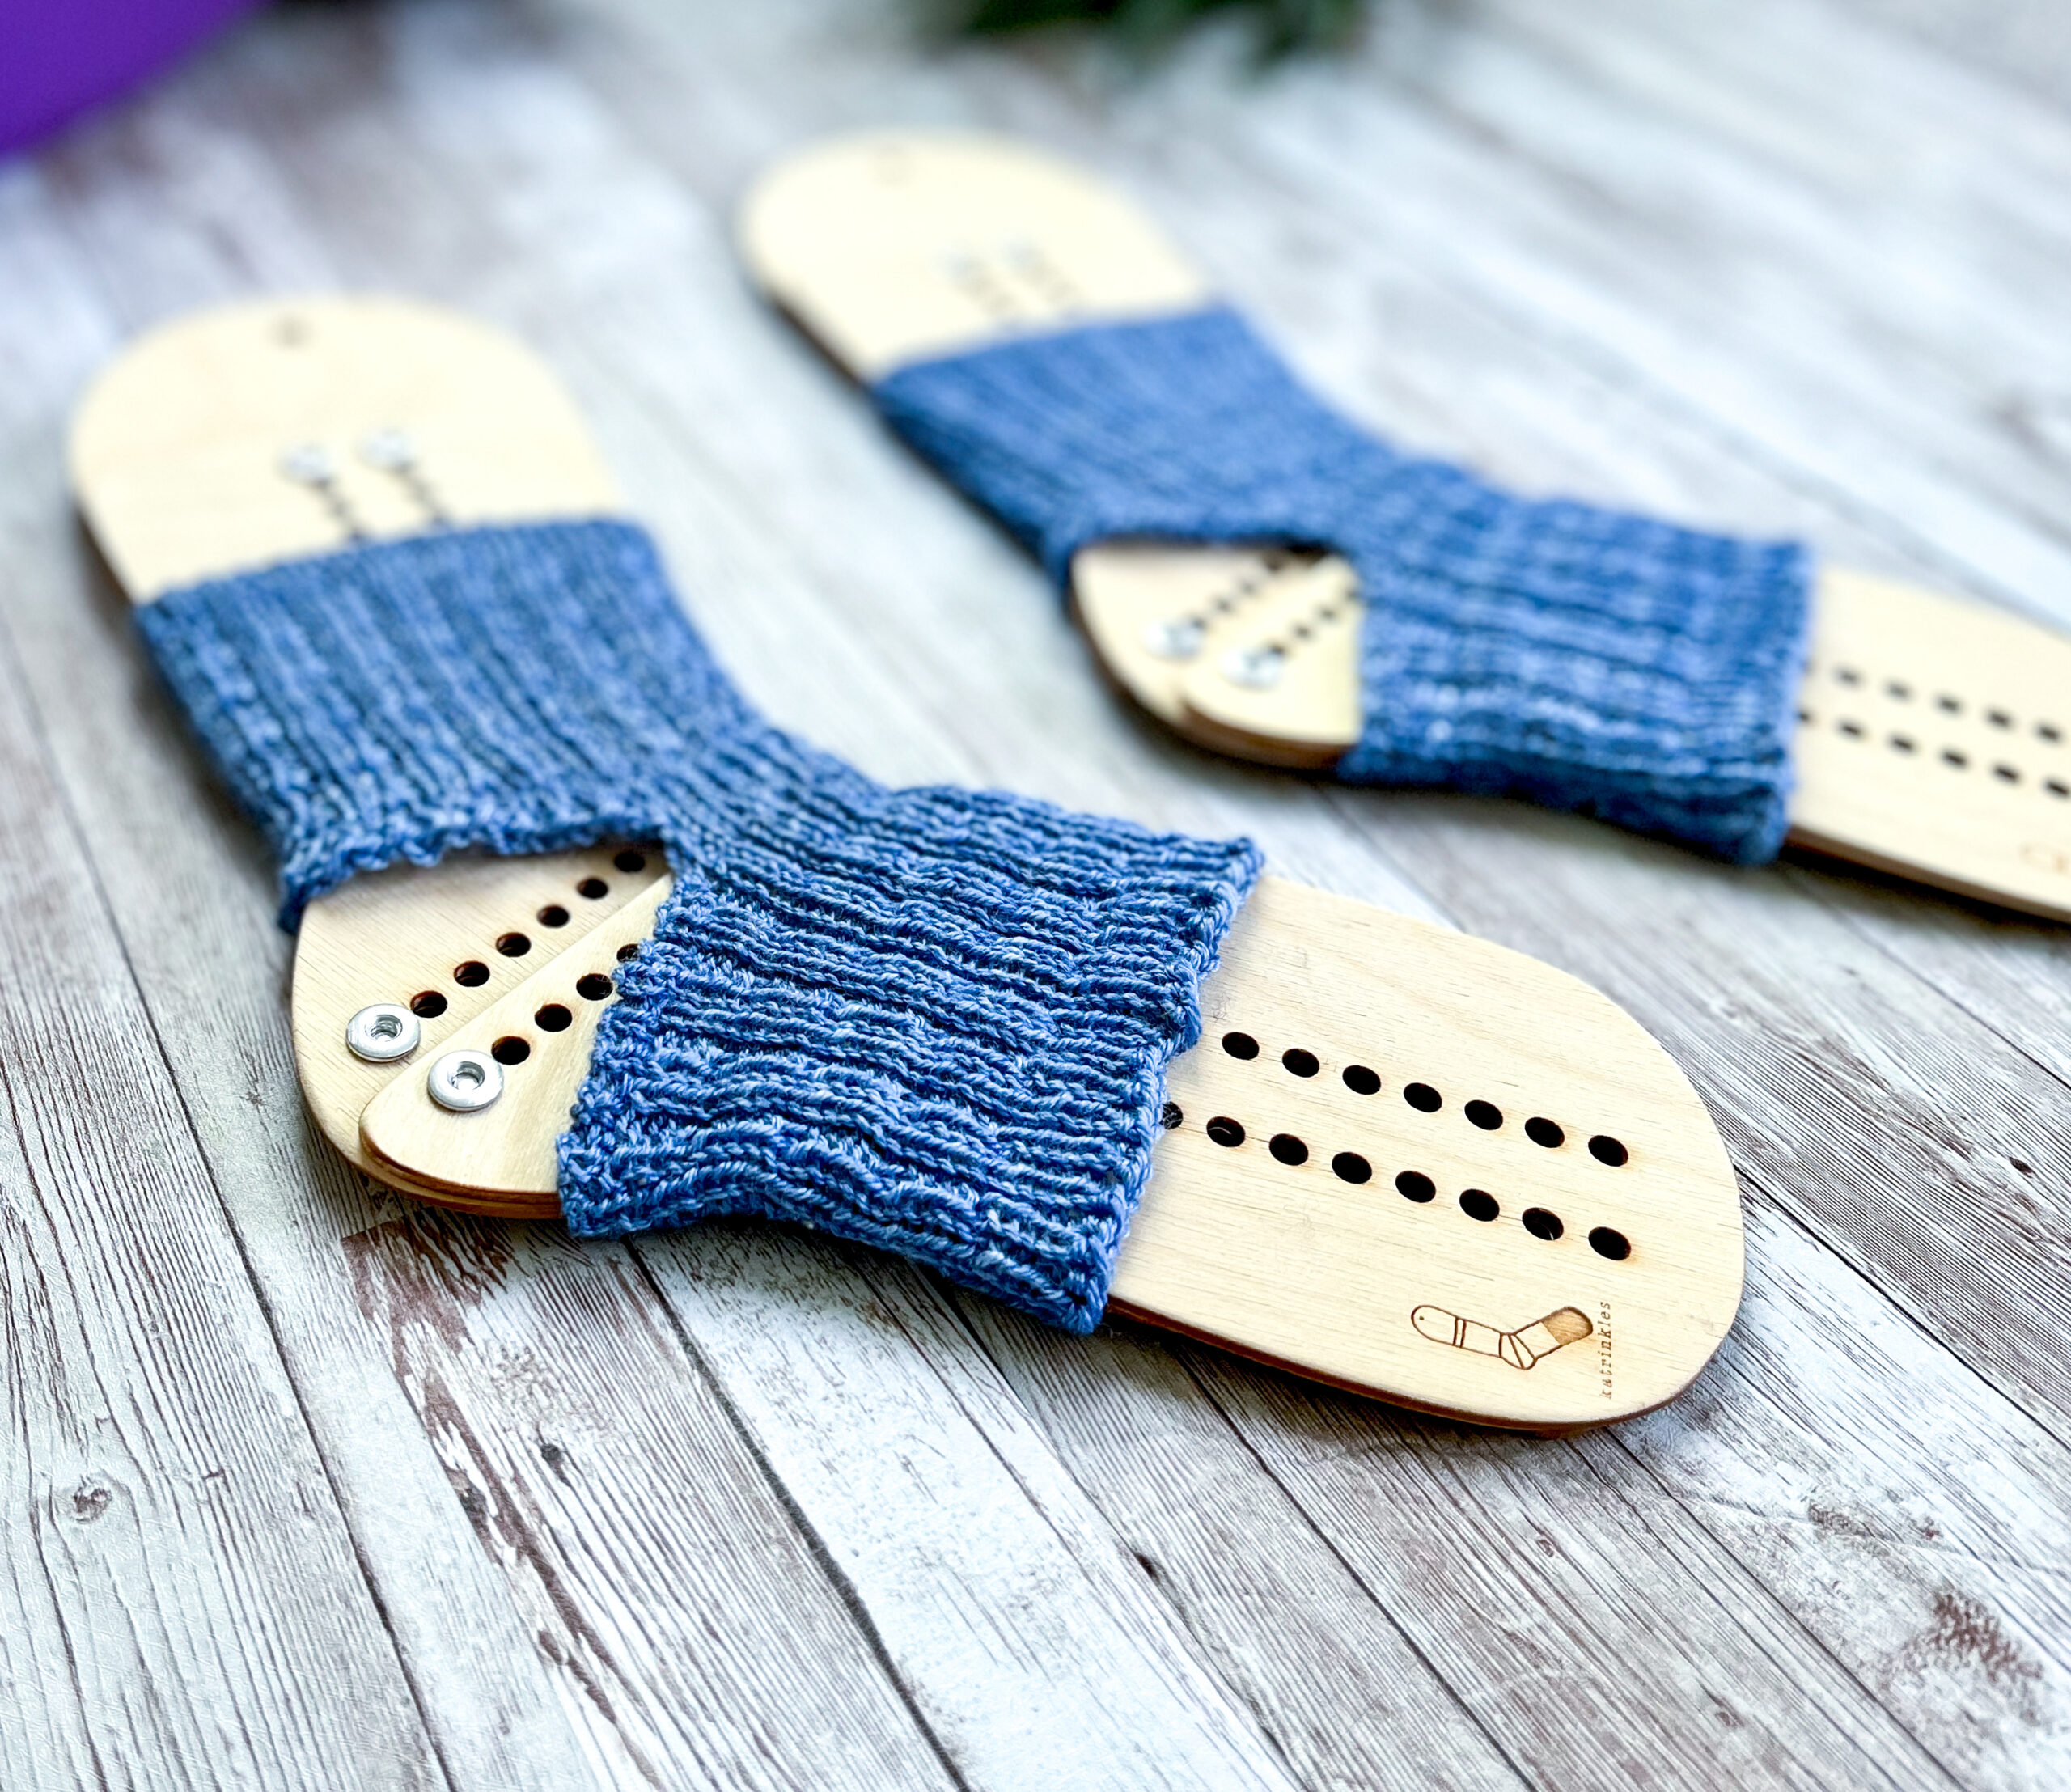 A pair blue yoga socks on wooden sock blockers are on a wood panel